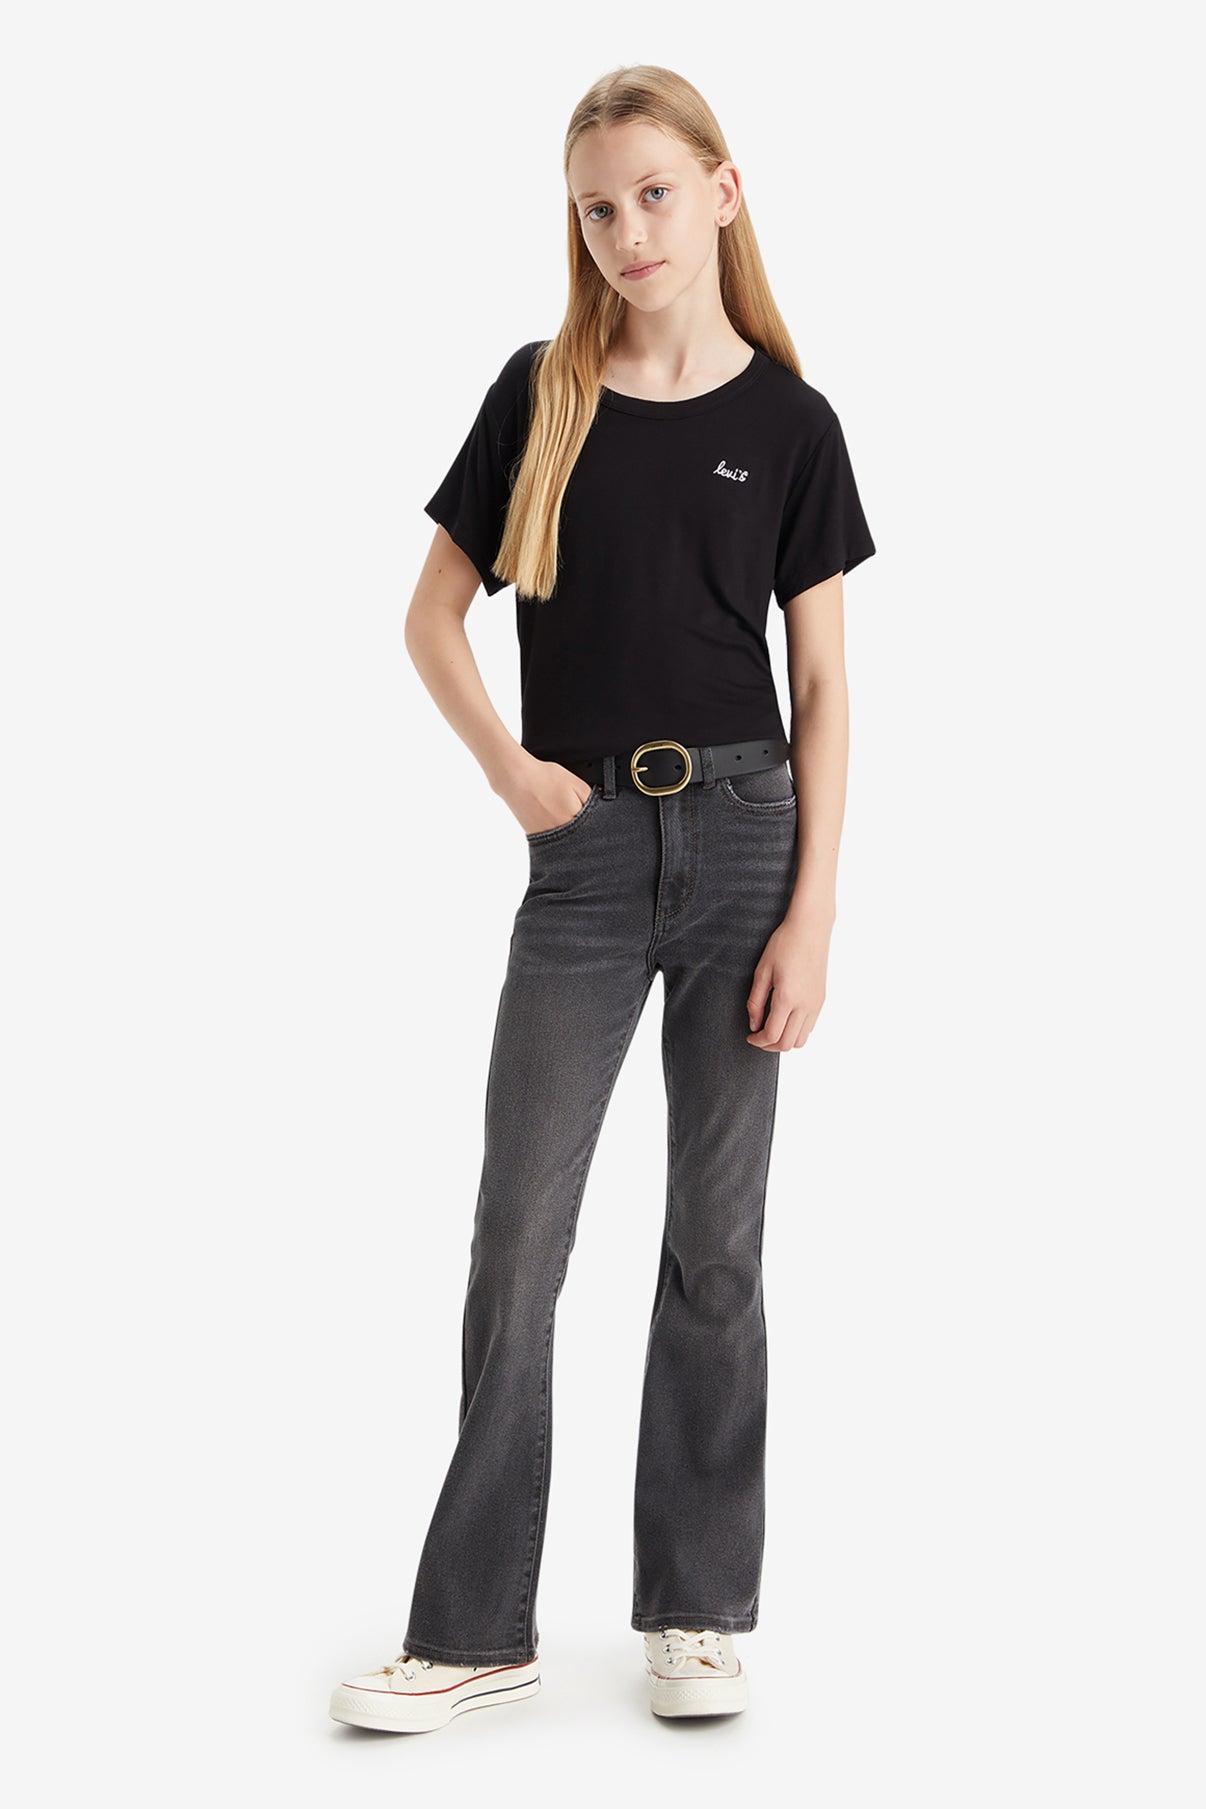 LEVIS GIRL Jeans LVG HIGH RISE FLARE